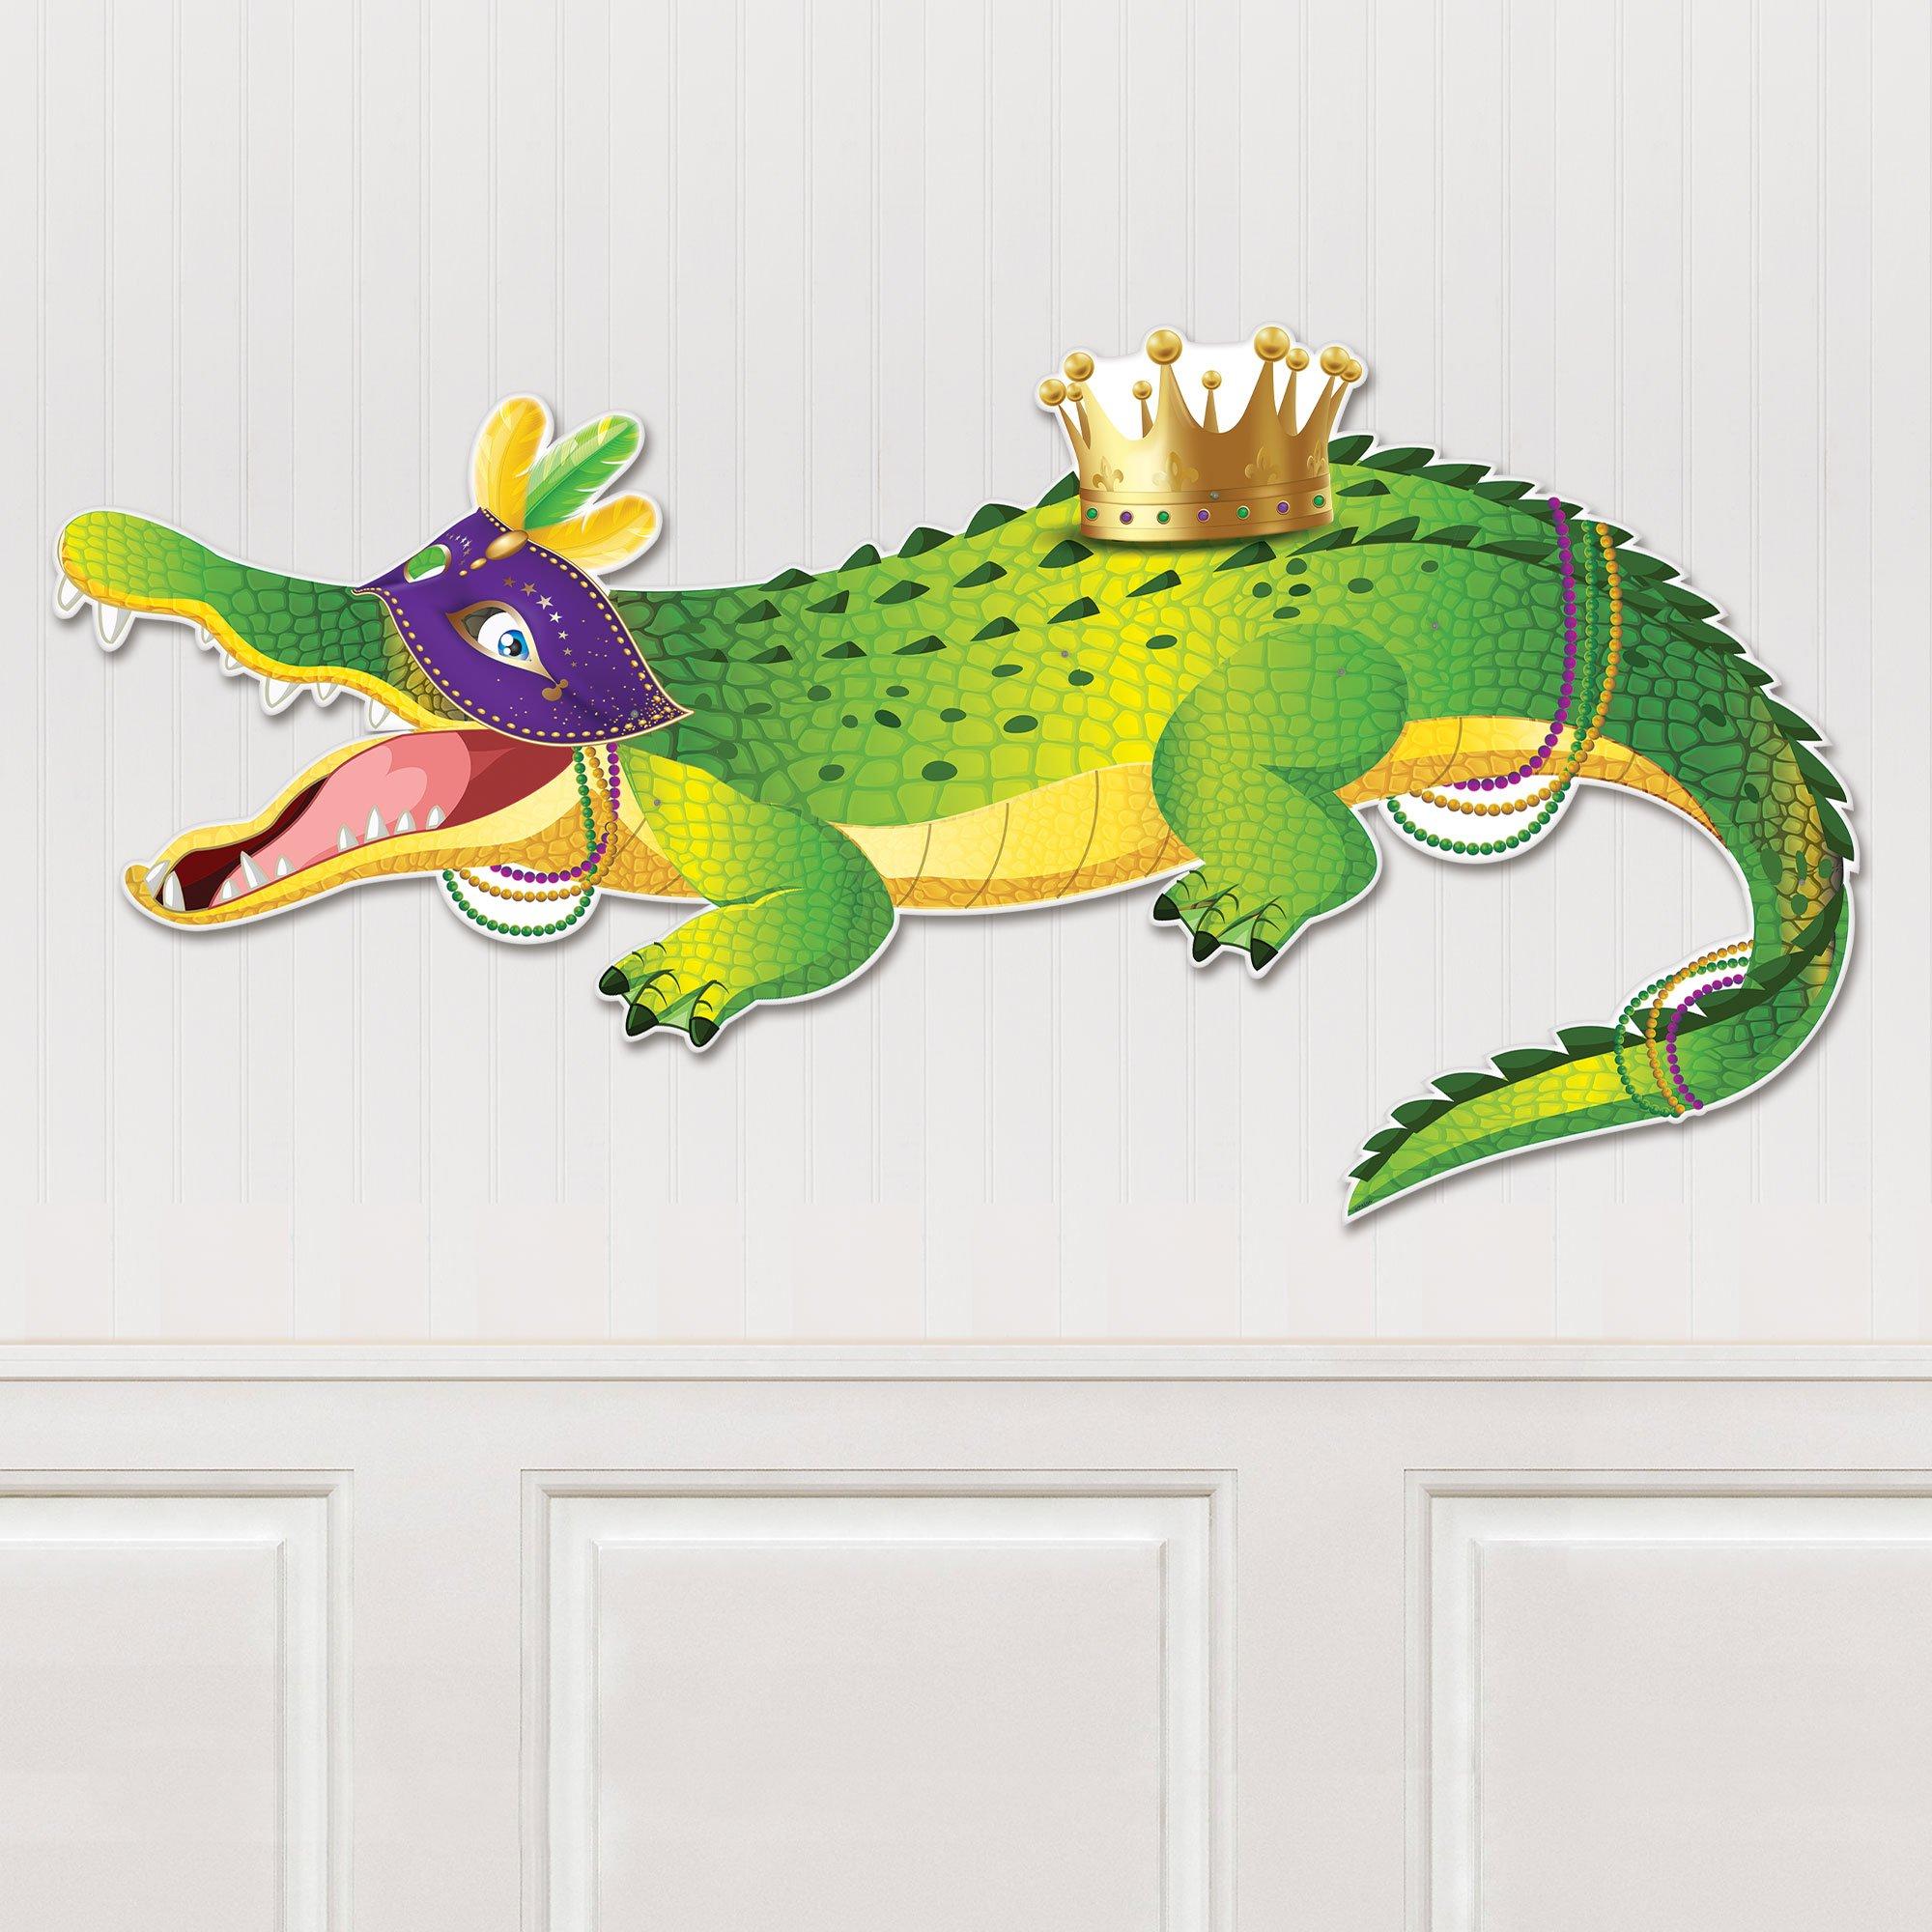 Mardi Gras Alligator Jointed Cutout, 5.41ft x 2.75ft